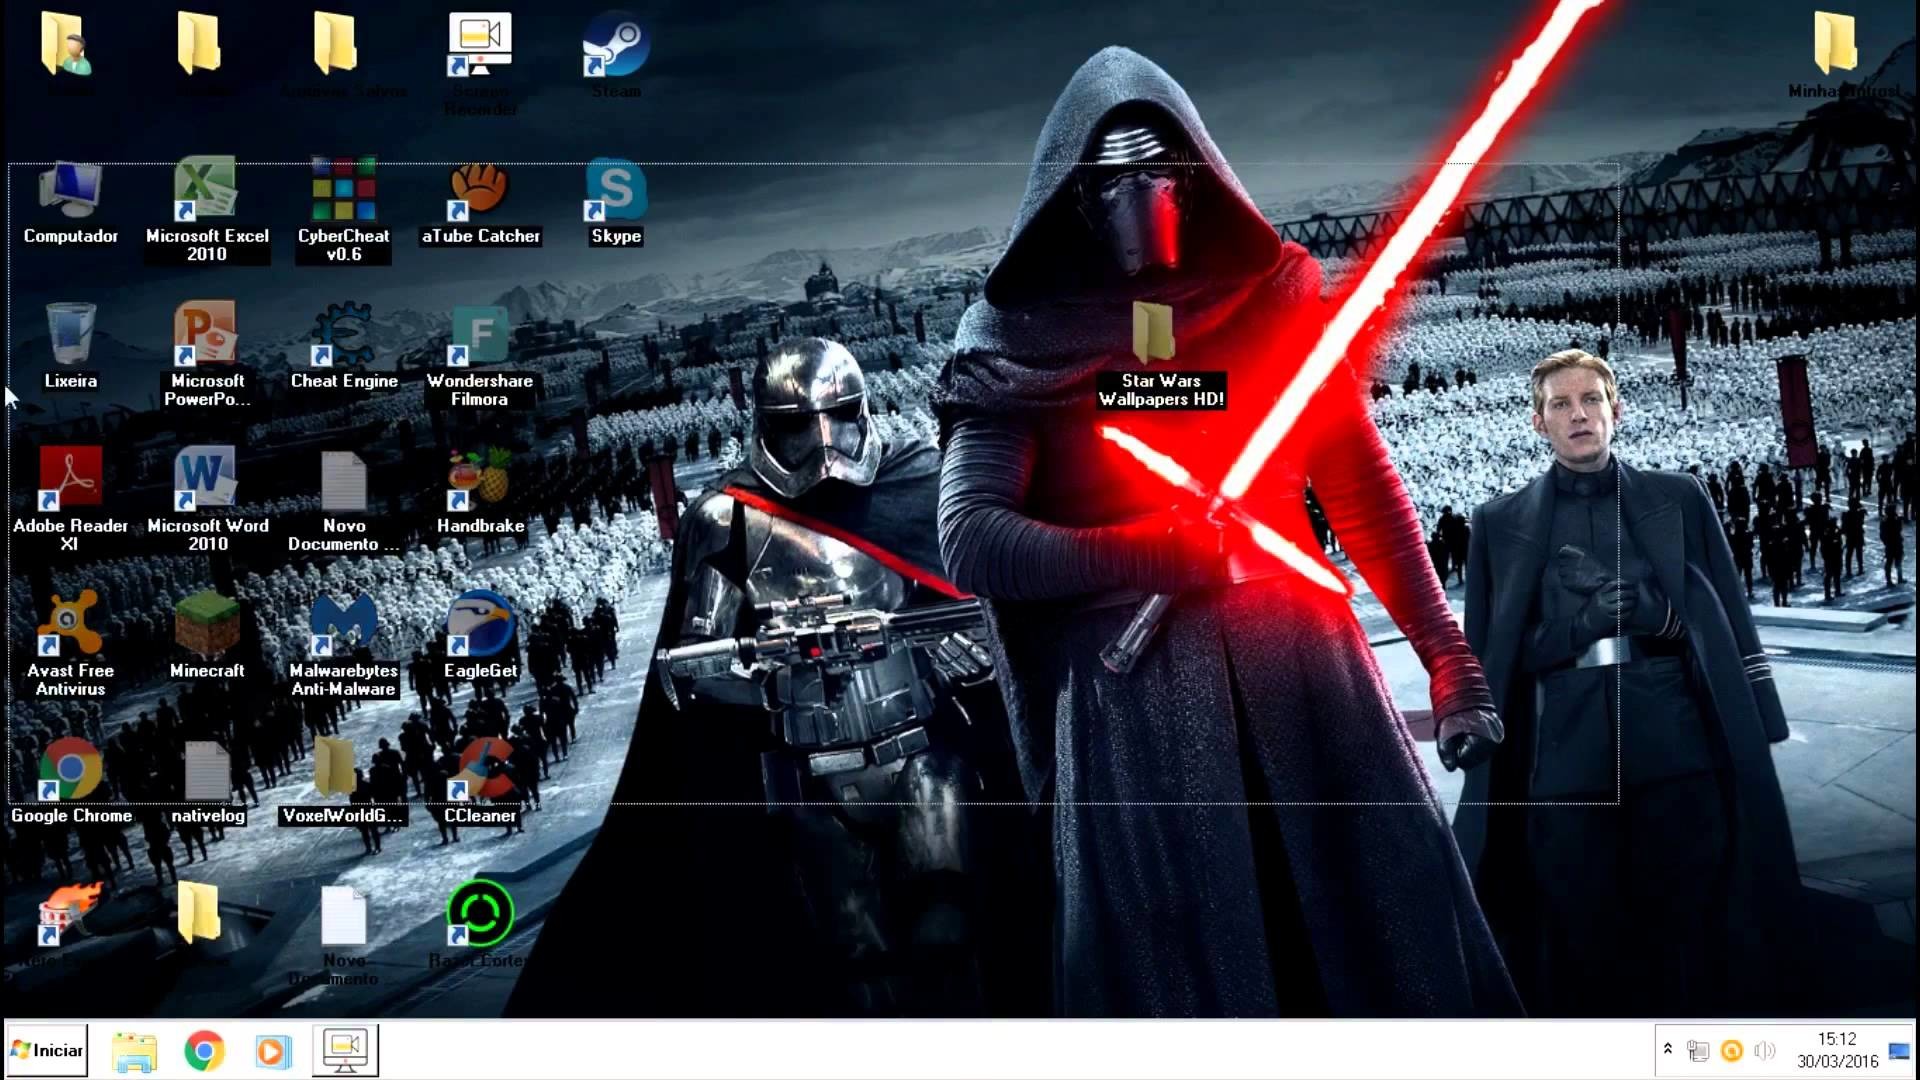 Star Wars Live Wallpaper Android (70+ images)